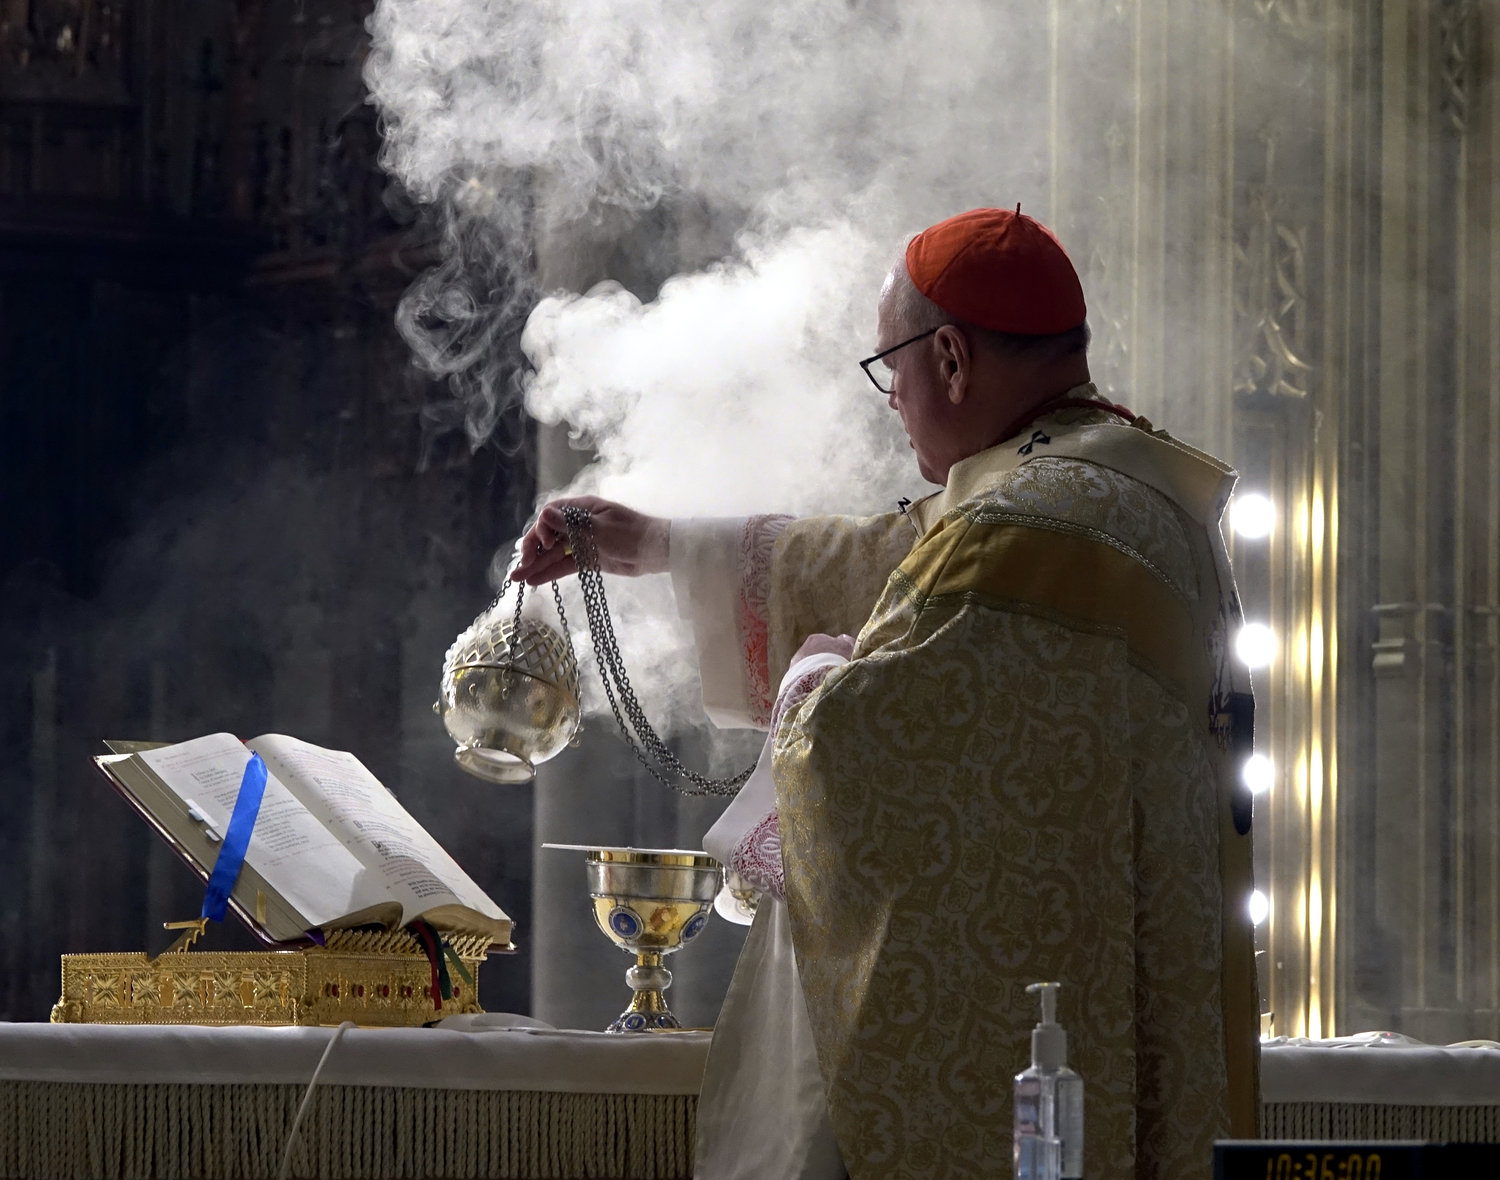 EASTER MASS—Cardinal Dolan incenses the altar at St. Patrick’s Cathedral on Easter Sunday, April 12, 2020. This photo won first-place honors in the annual Catholic Press Awards competition. Story on page 9.